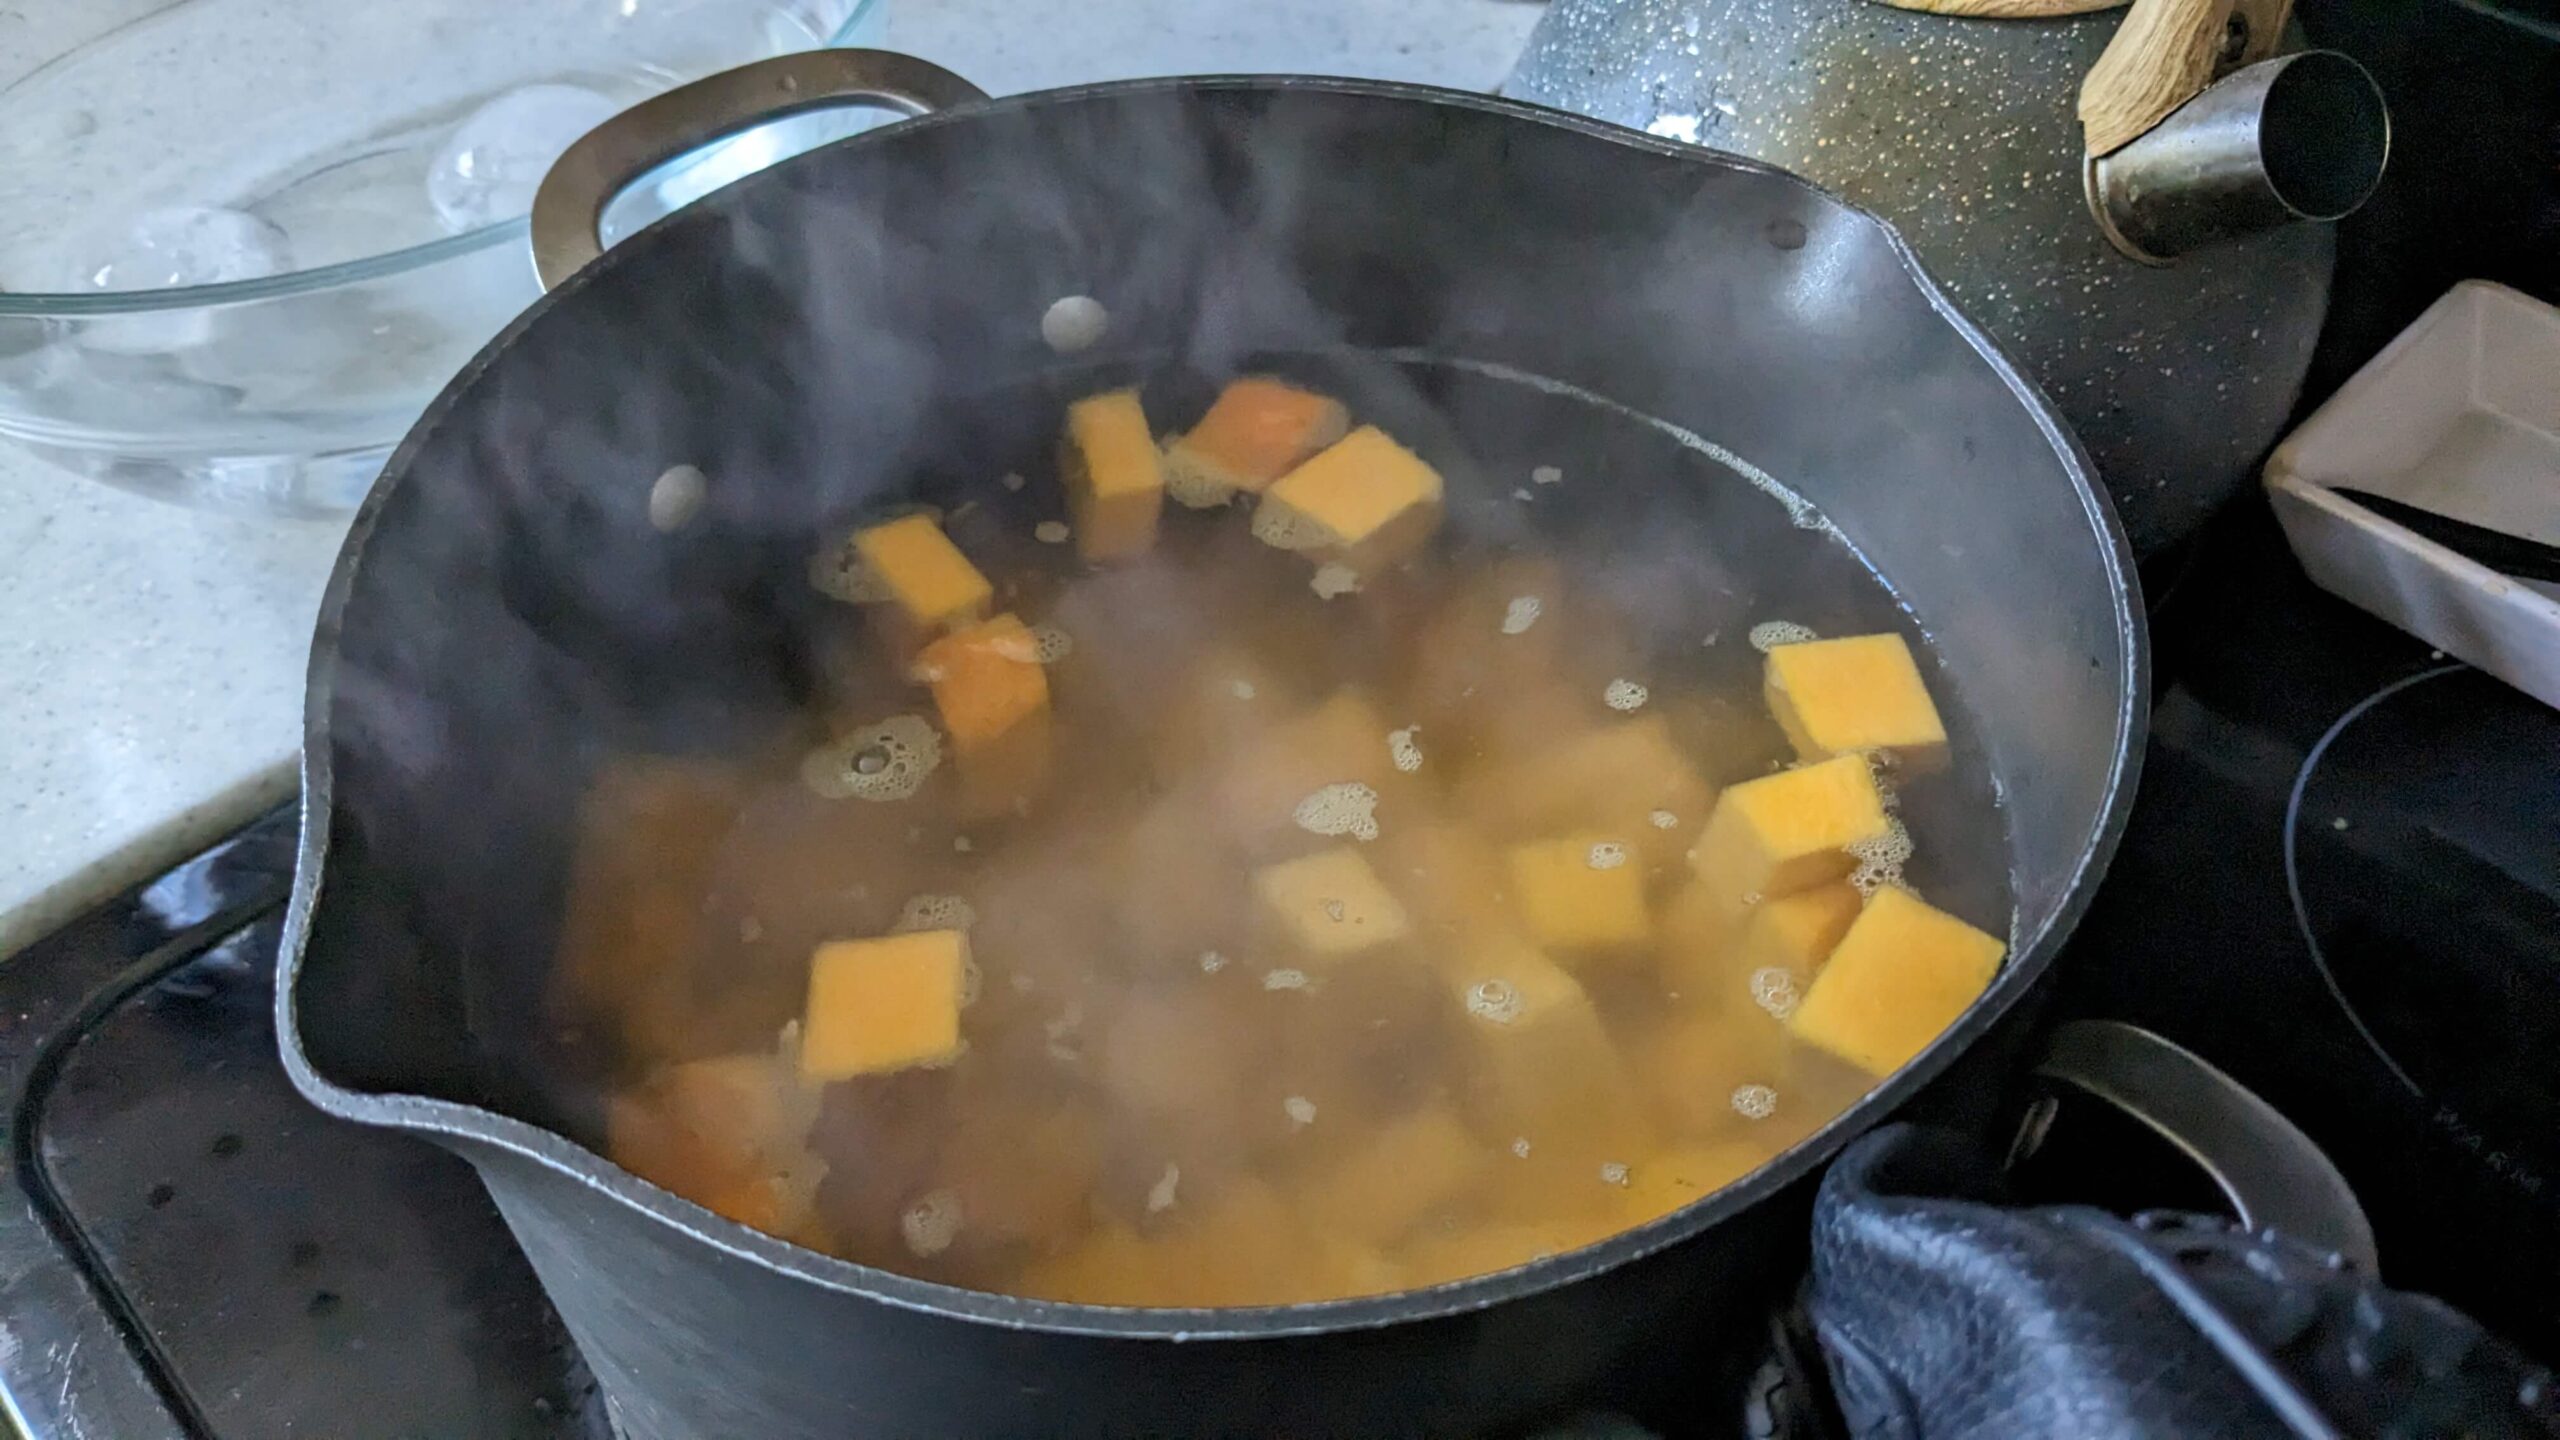 butternut squash in a pot of heated water on the stove 